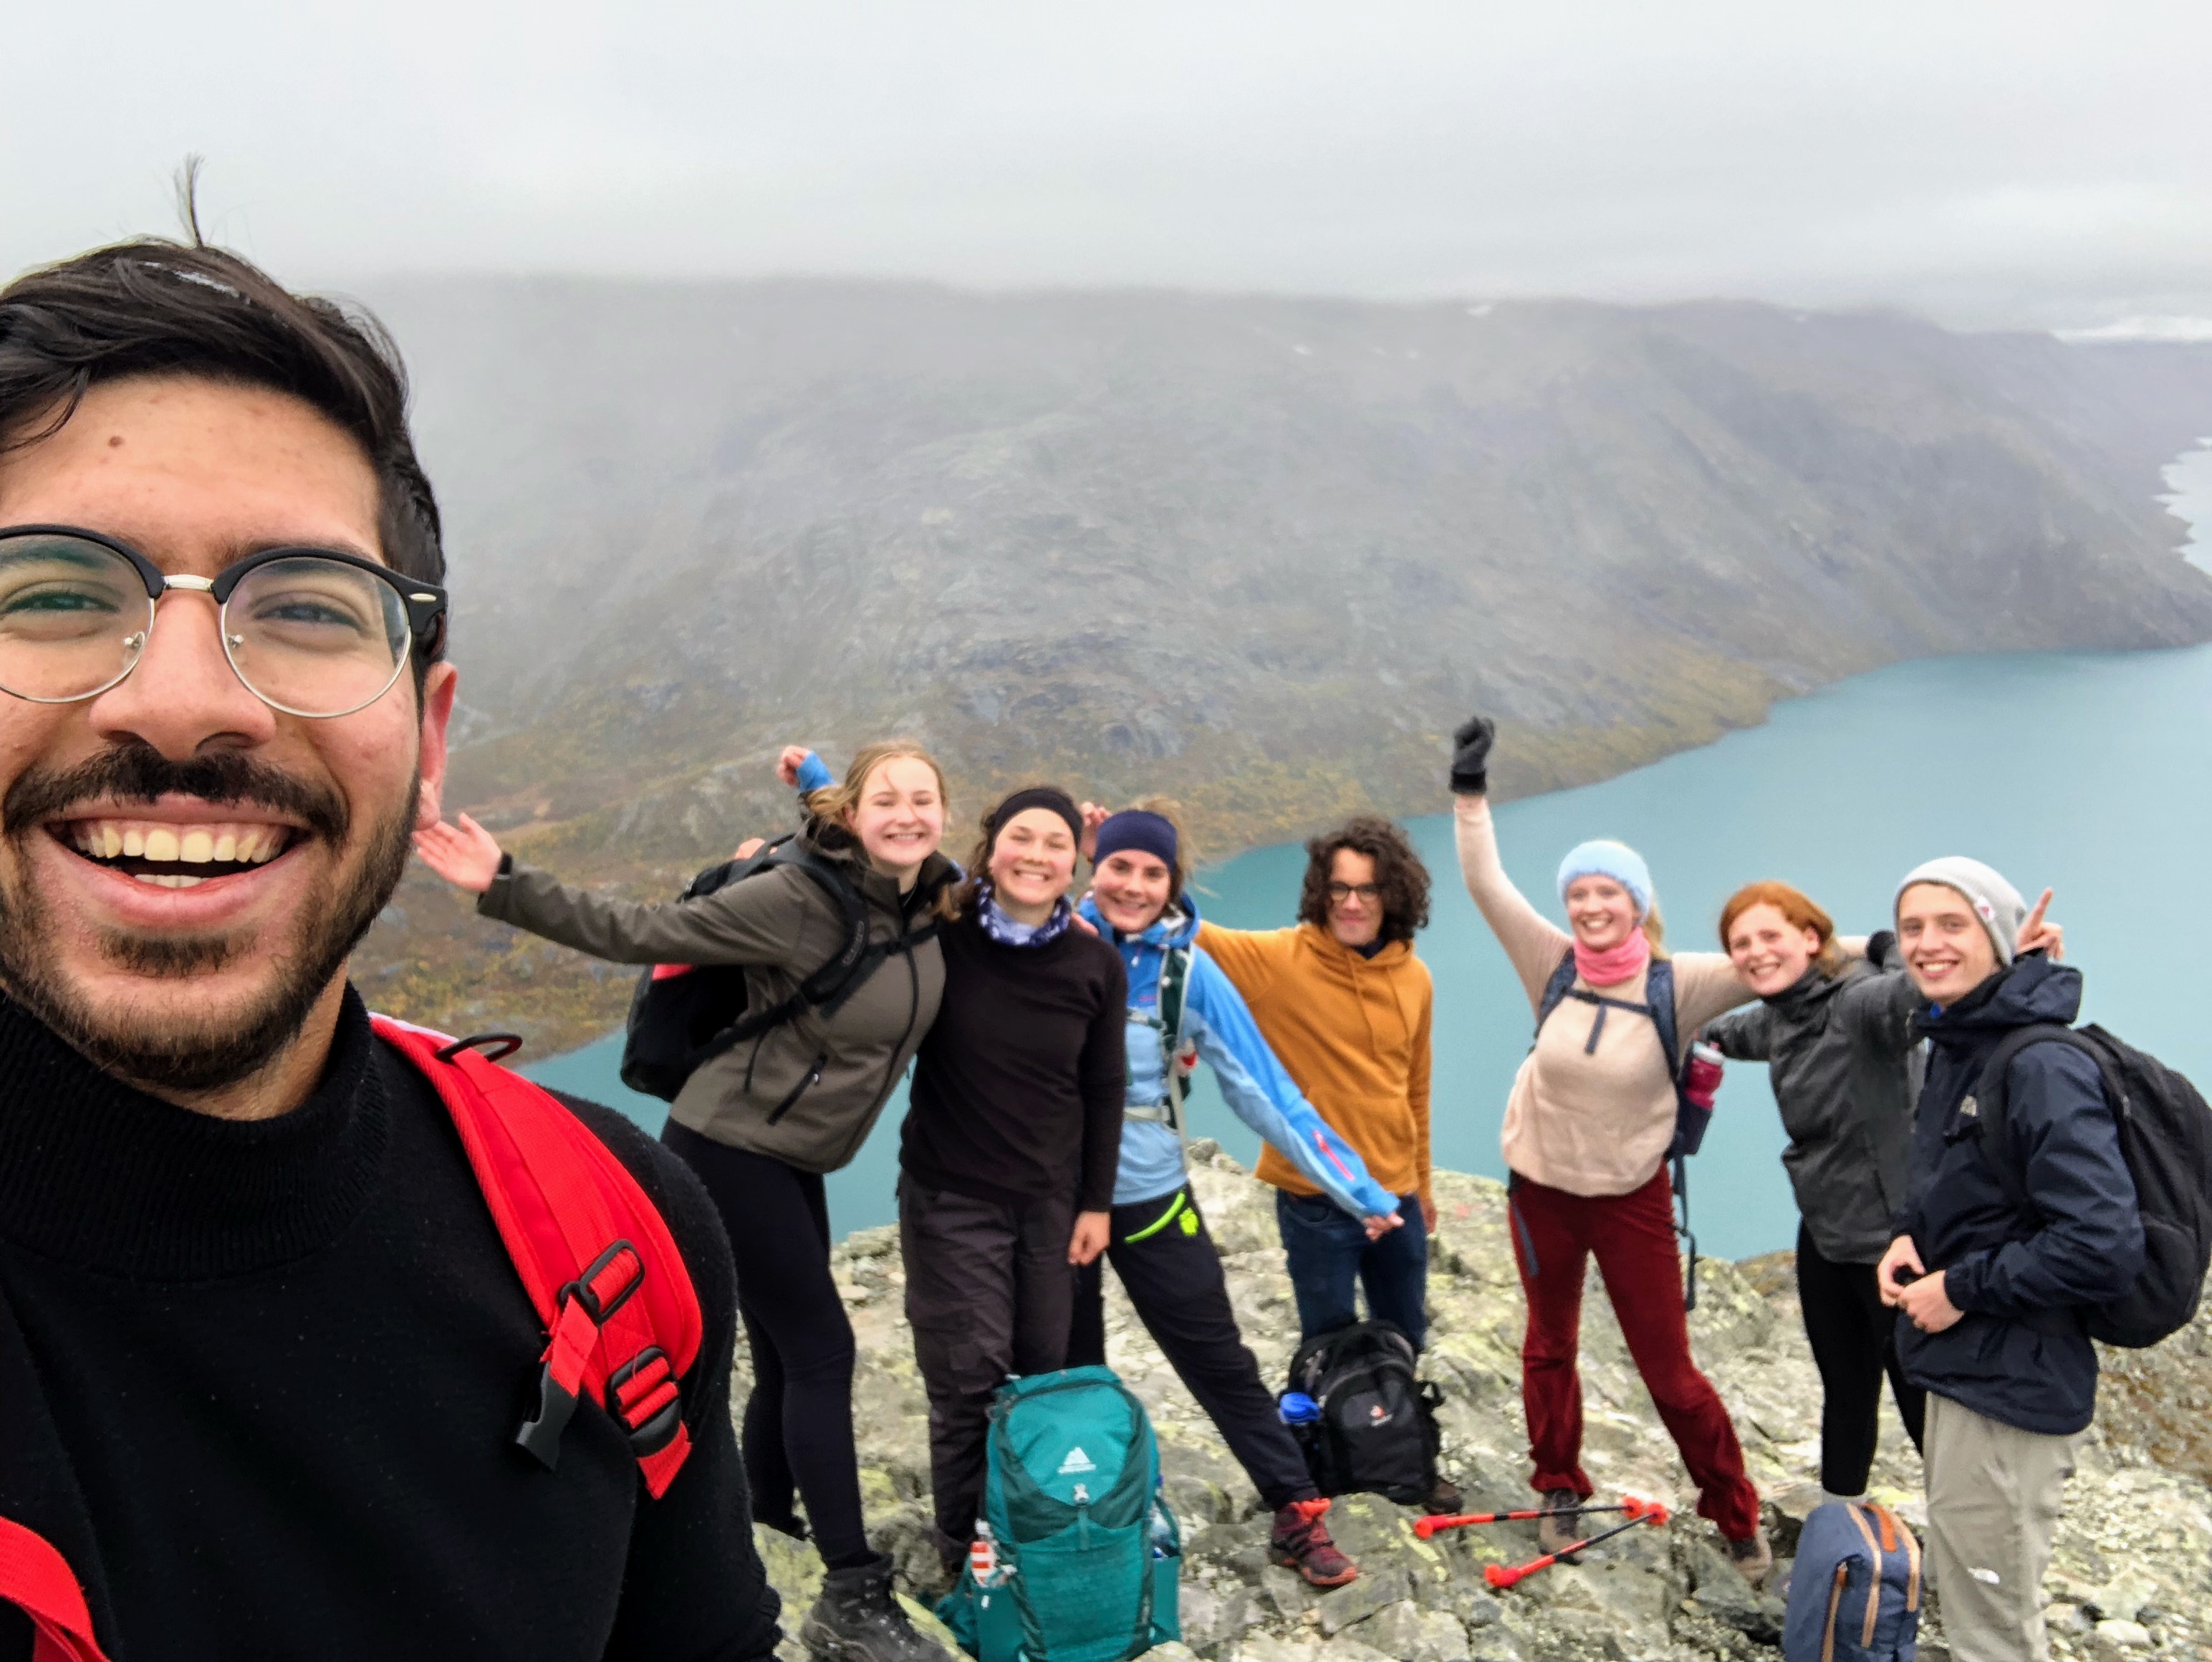 Abdalla Ashraf takes a selfie with his friends on a cliff in Norway over a body of water